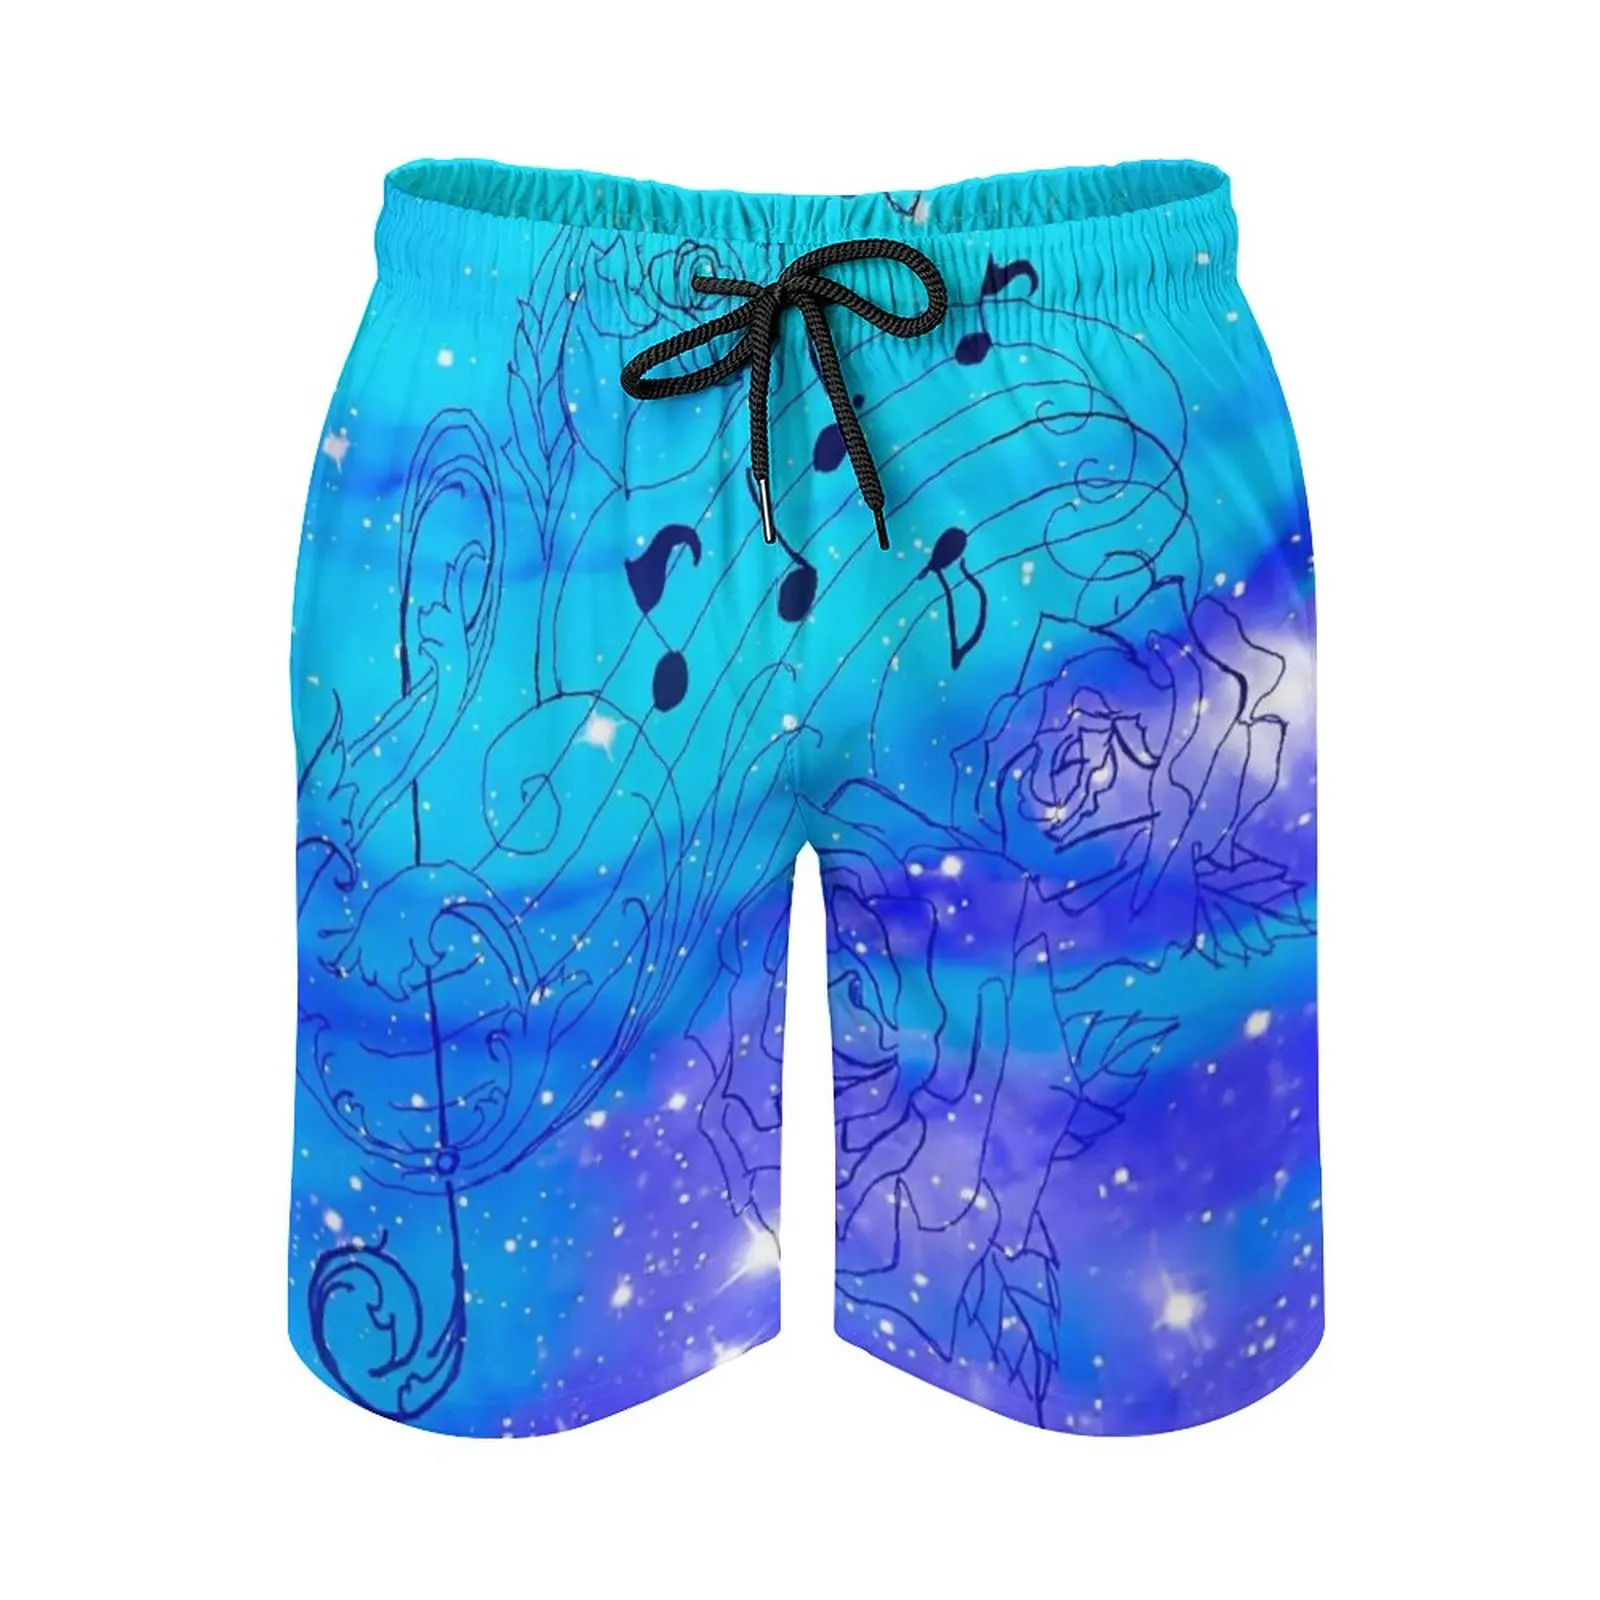 

Space Music Men's Beach Shorts With Mesh Lining Surfing Pants Swim Trunks Galaxy Music Roses Treble Clef Stars Blue Galaxy